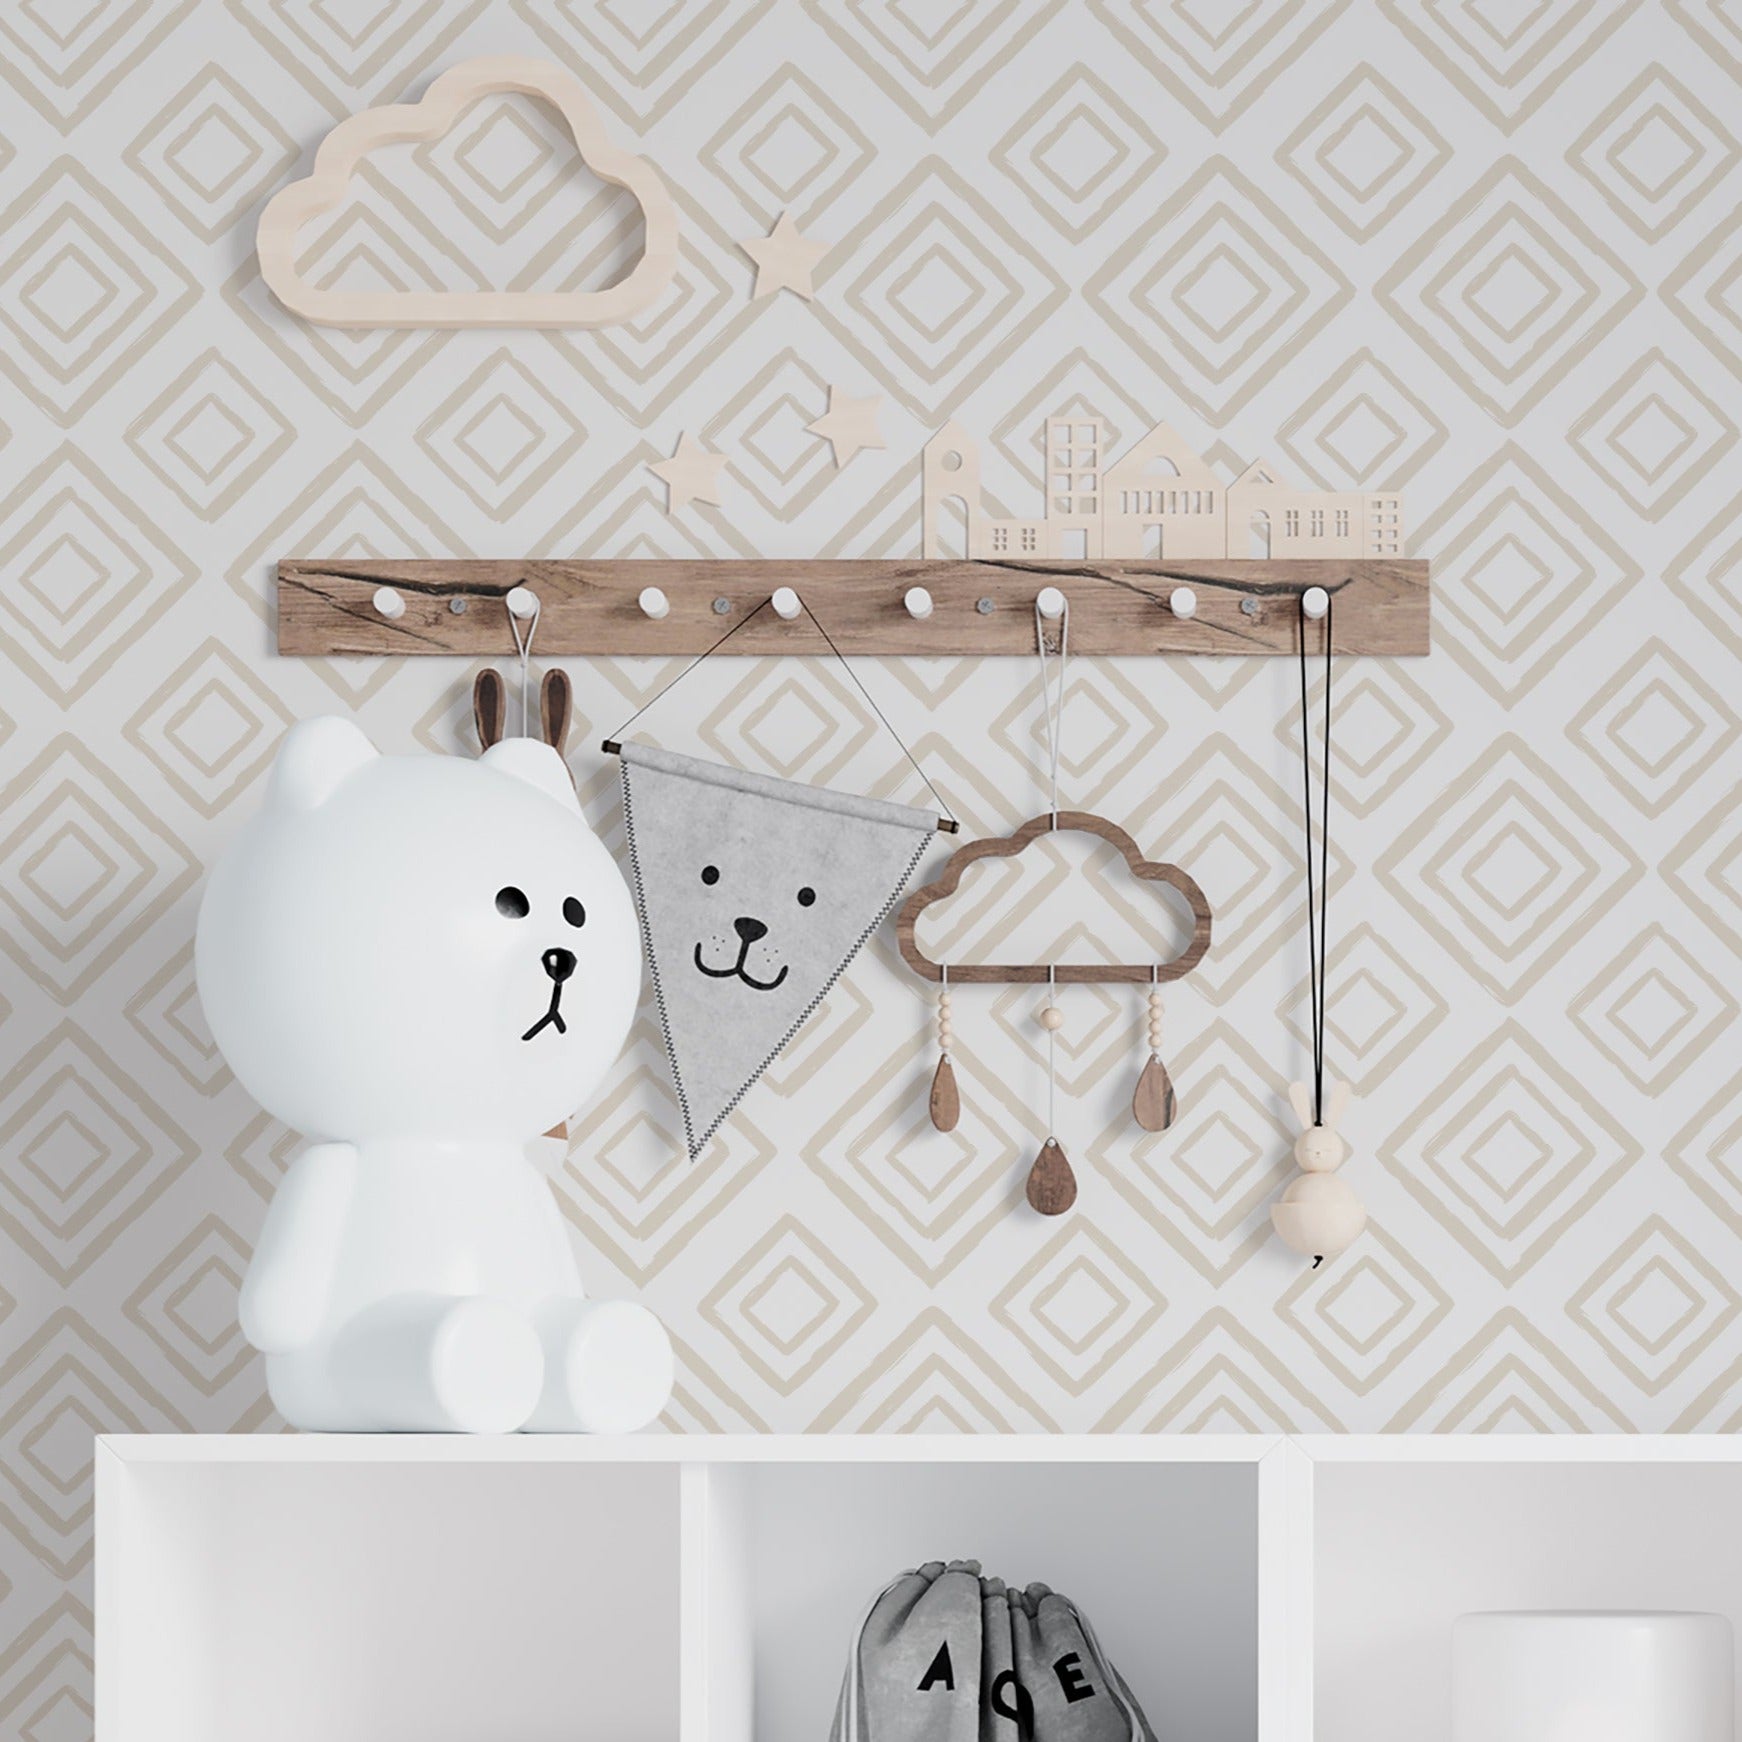 A nursery room decorated with Organic Shape Wallpaper 18 on the walls, featuring a geometric pattern in taupe. The room includes a white storage unit with wicker baskets and playful children's accessories, creating a stylish yet functional space.